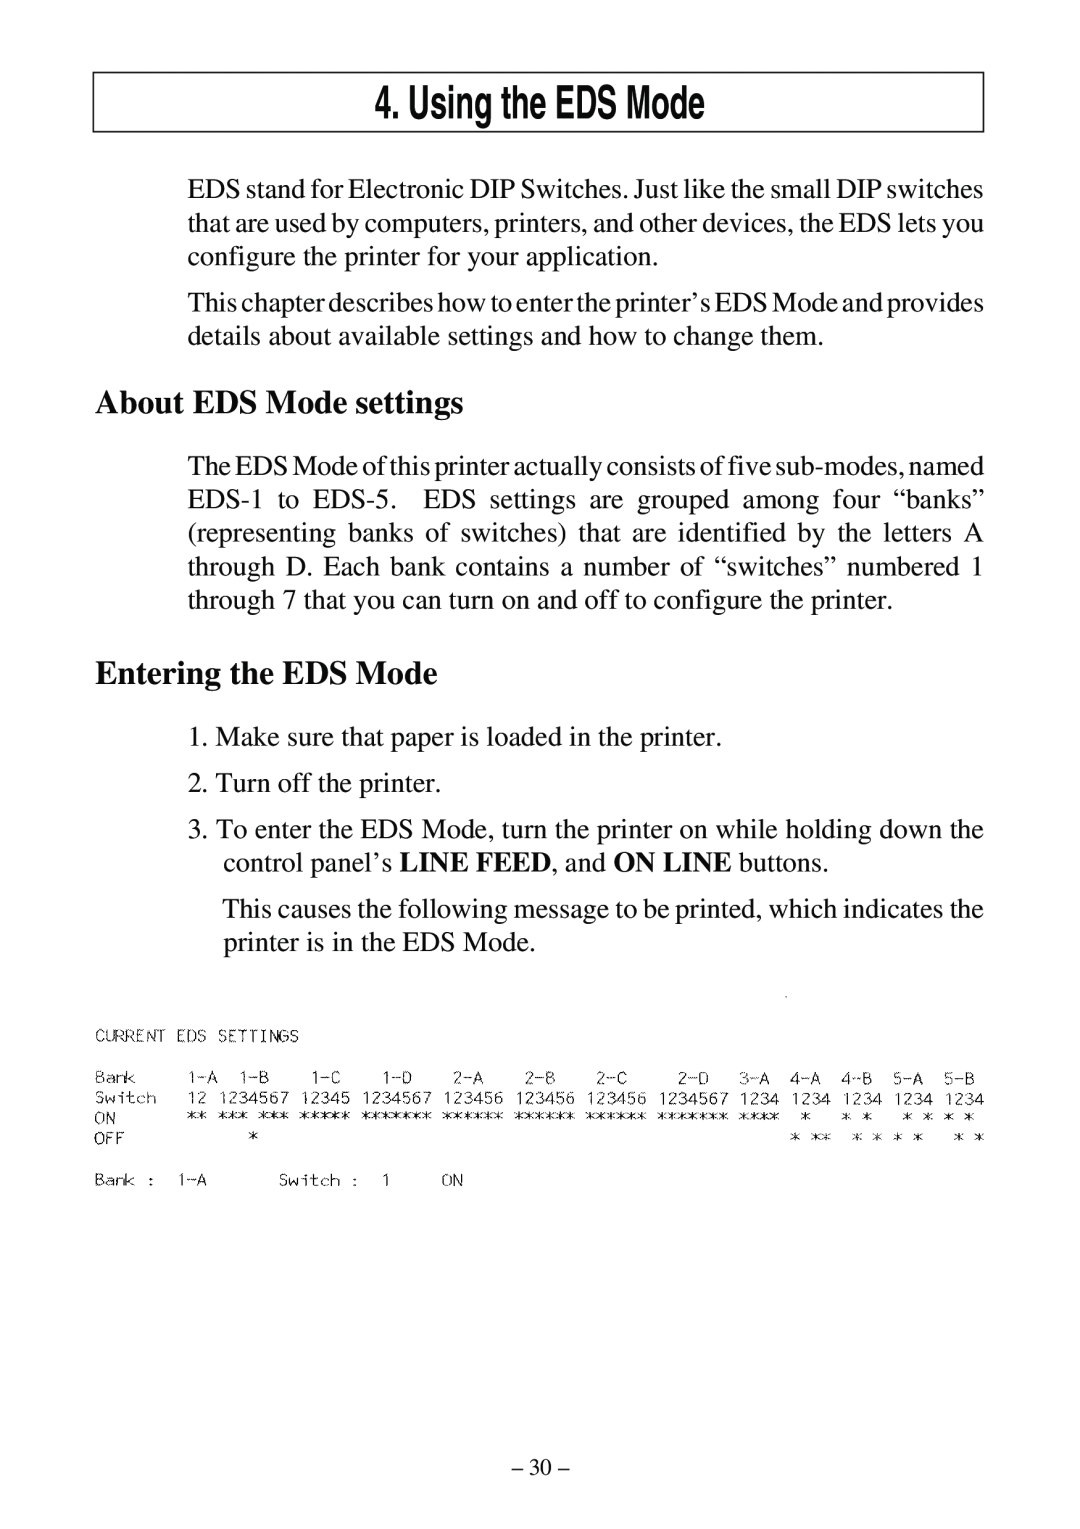 Star Micronics LC-500 user manual Using the EDS Mode, About EDS Mode settings, Entering the EDS Mode 